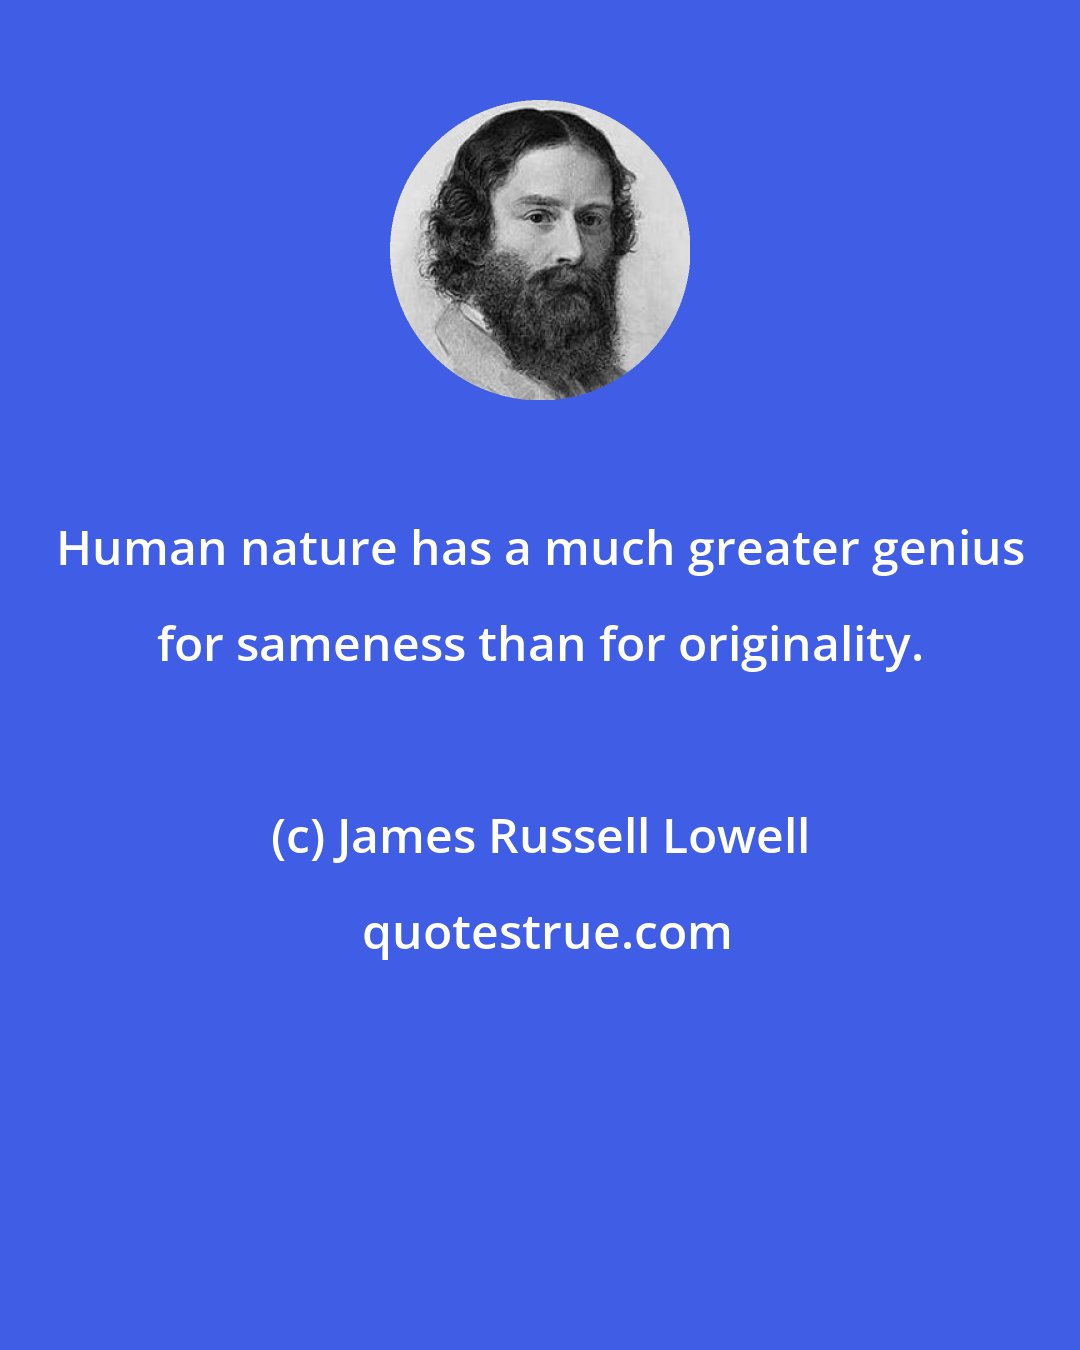 James Russell Lowell: Human nature has a much greater genius for sameness than for originality.